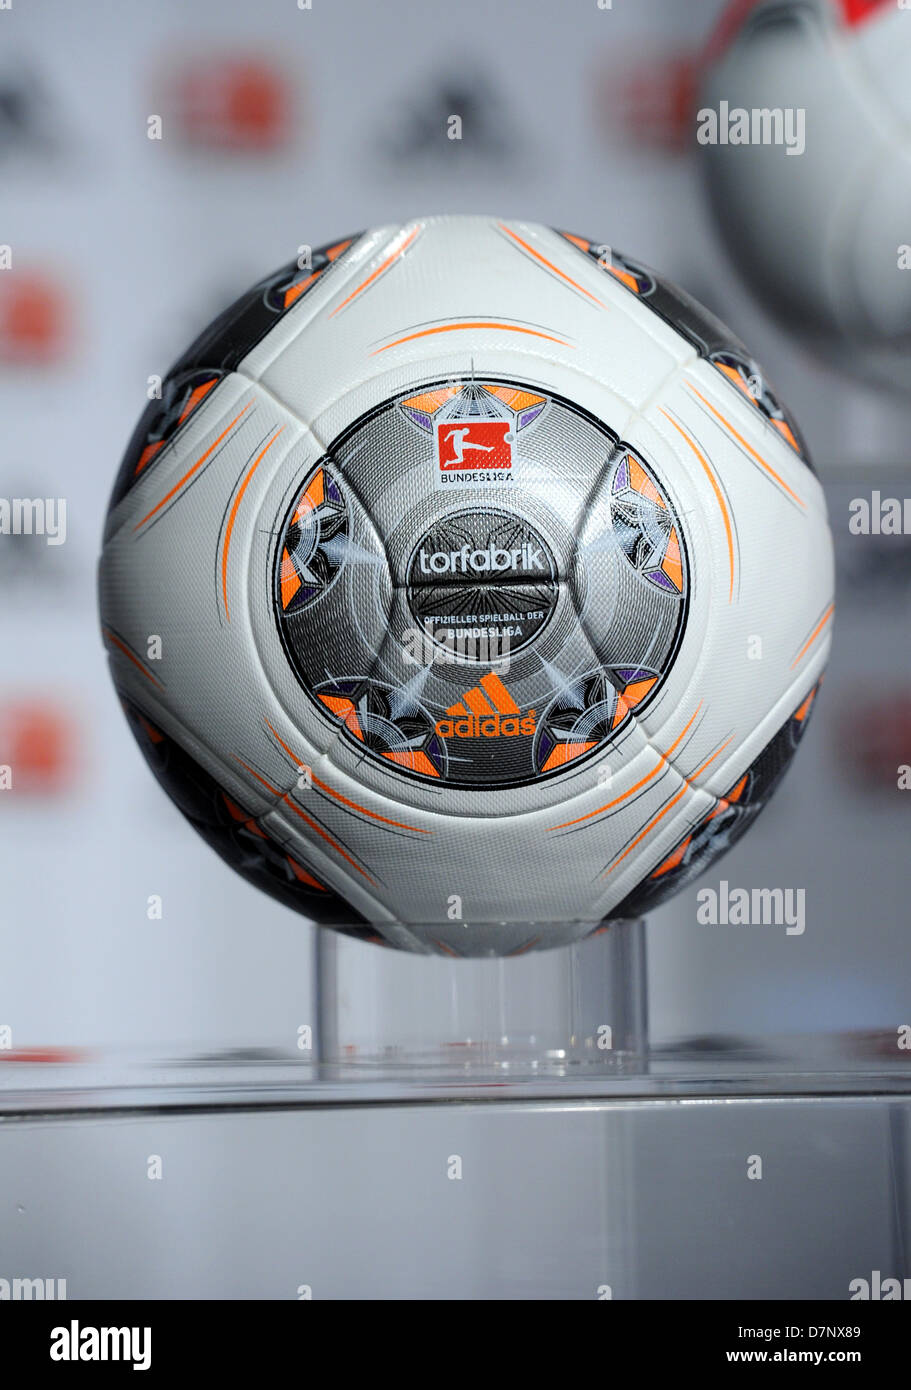 Muenchen, Germany, 11 May 2013. Official ball for the season 2013/14, ' Torfabrik 4', made by